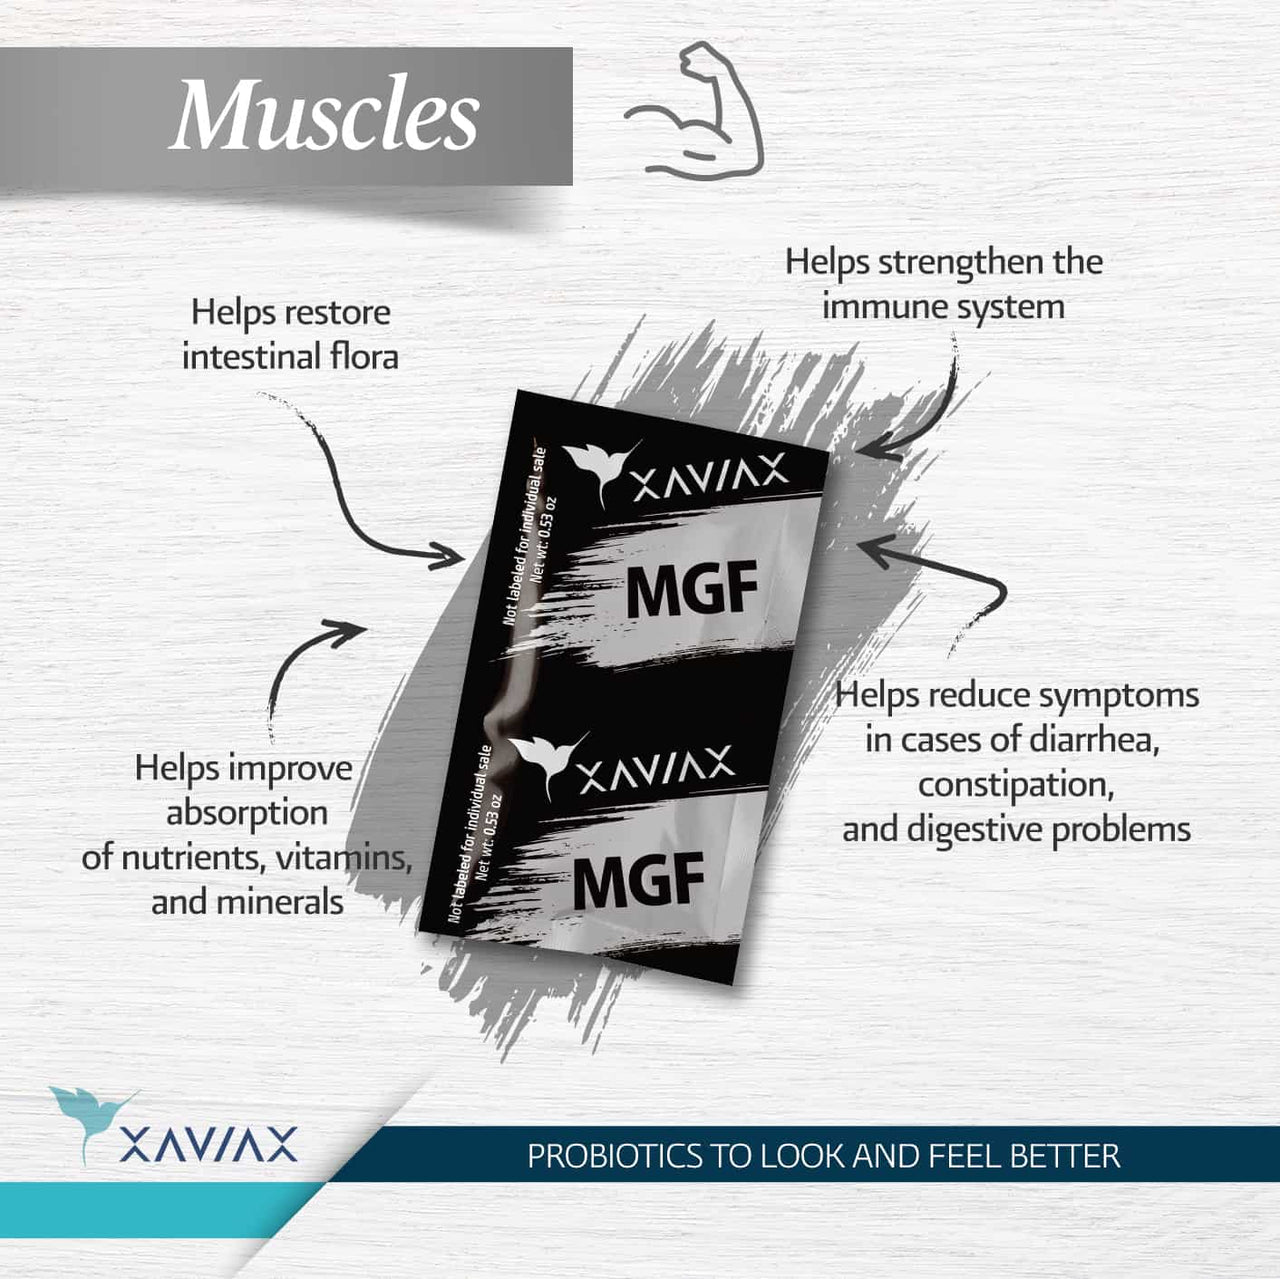 magnesium helps improve absorption of nutrients, vitamins and minerals